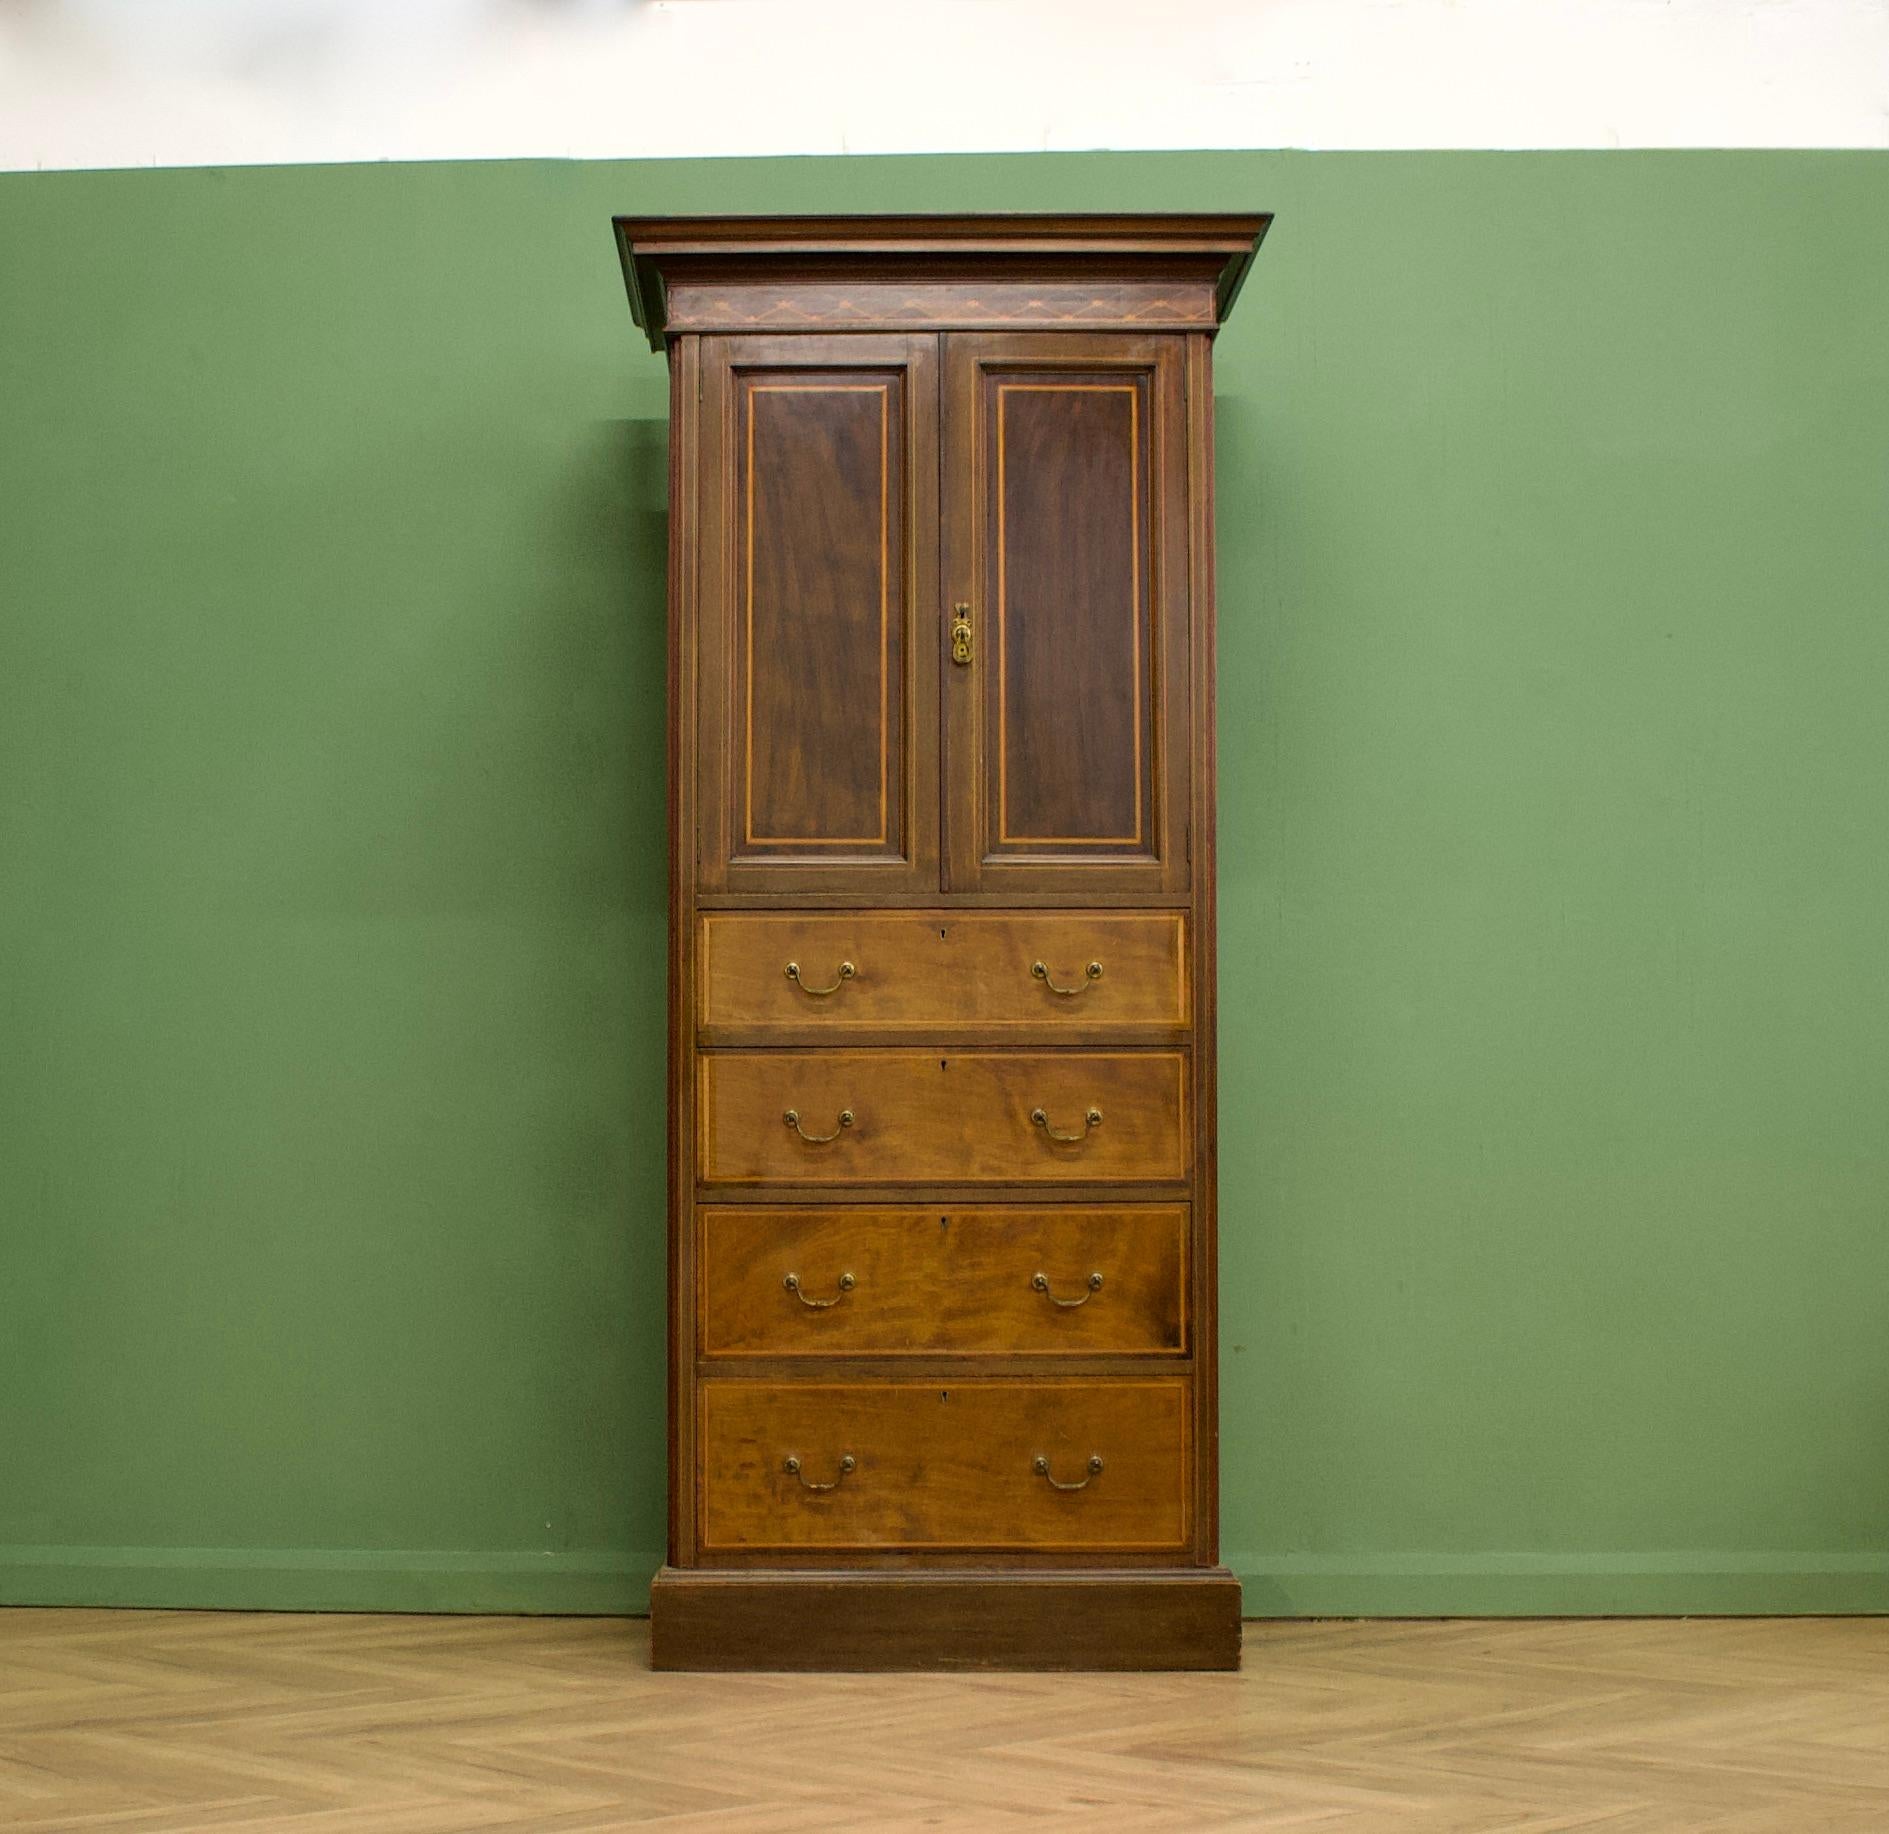 A tall, narrow Edwardian linen cabinet or hall cupboard

To the top there is a cupboard with two pull out drawers
To the bottom is four generous sized drawers